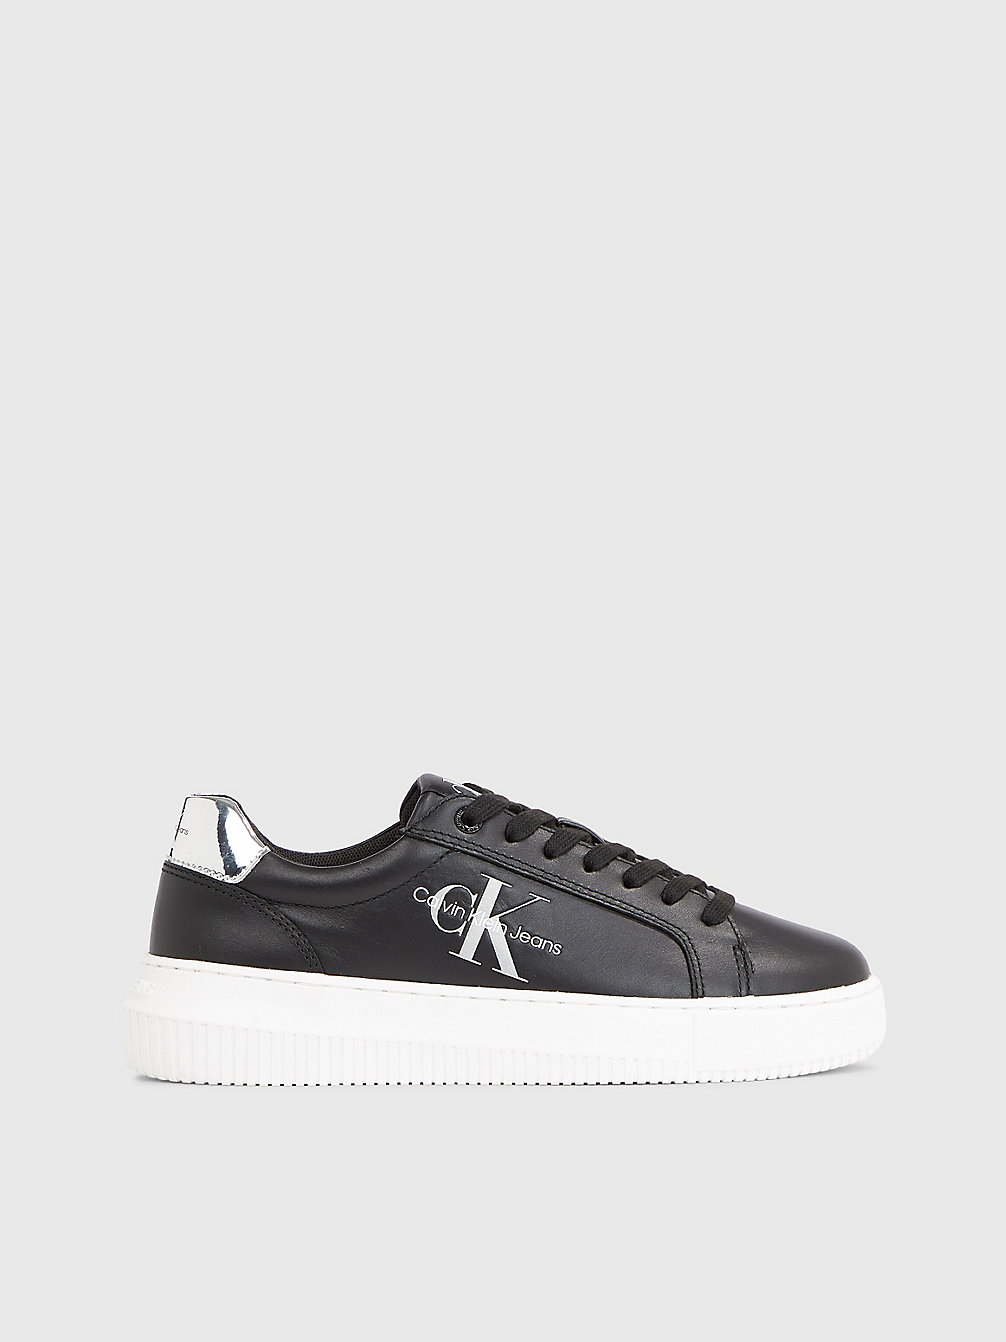 BLACK/SILVER Leather Trainers undefined women Calvin Klein